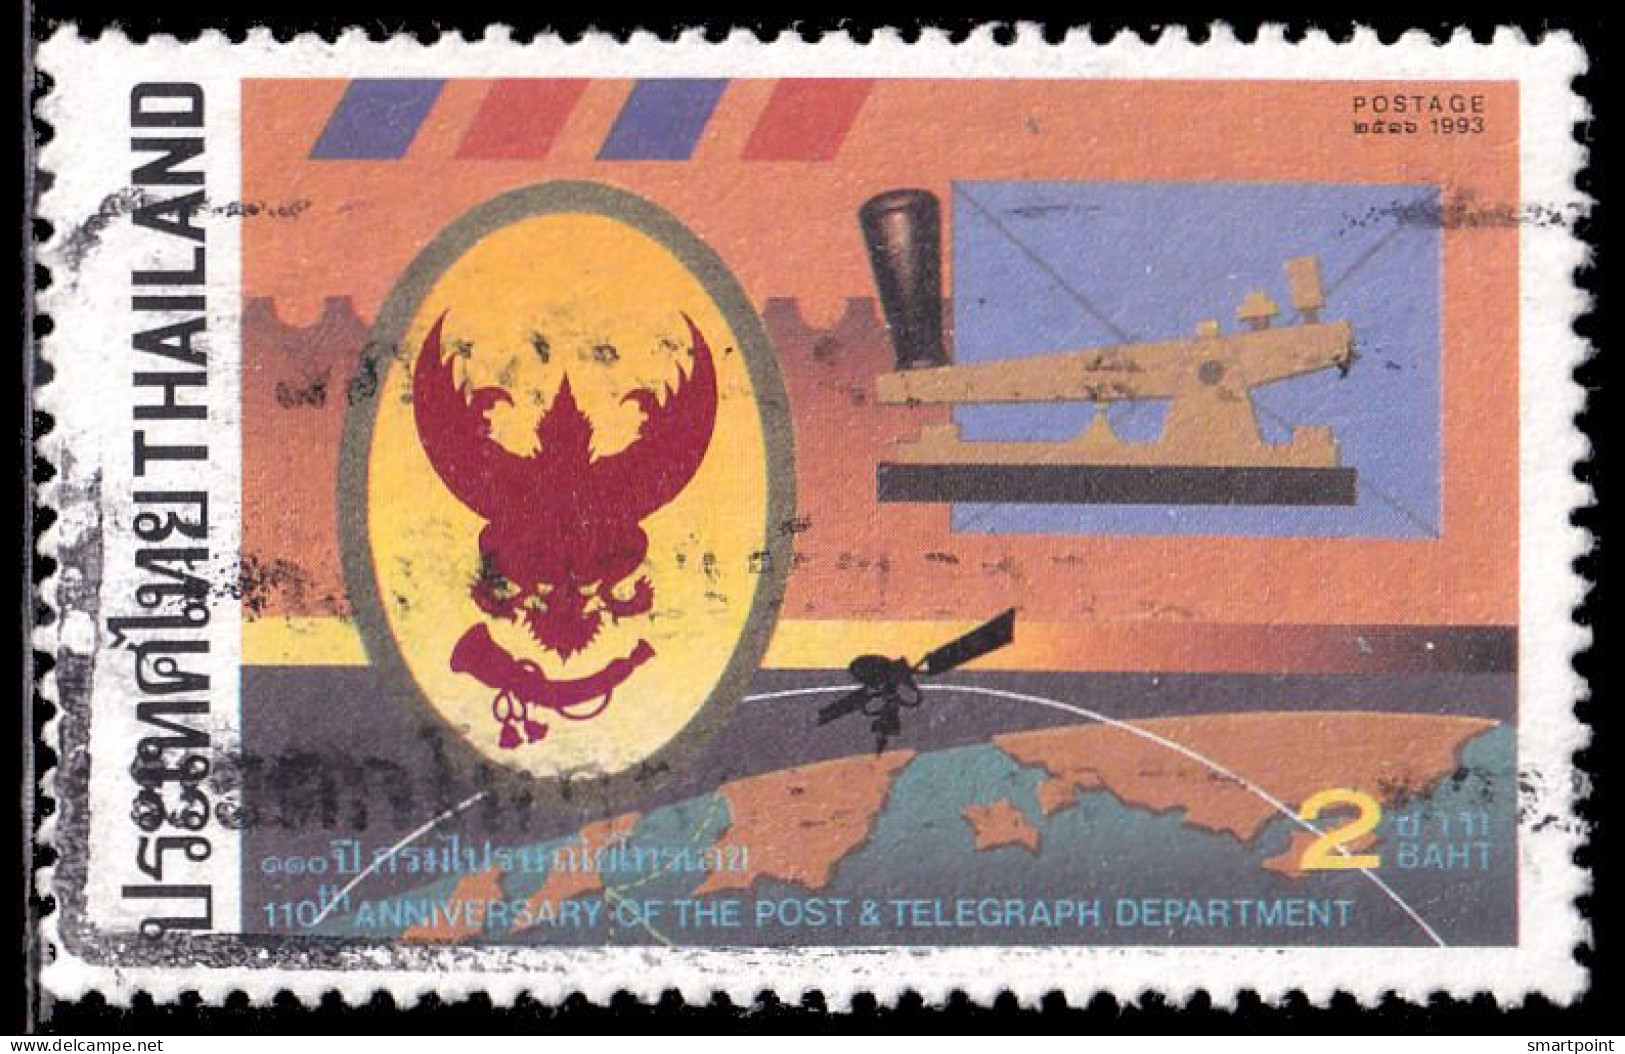 Thailand Stamp 1993 110th Anniversary Of The Post And Telegraph Department - Used - Thailand